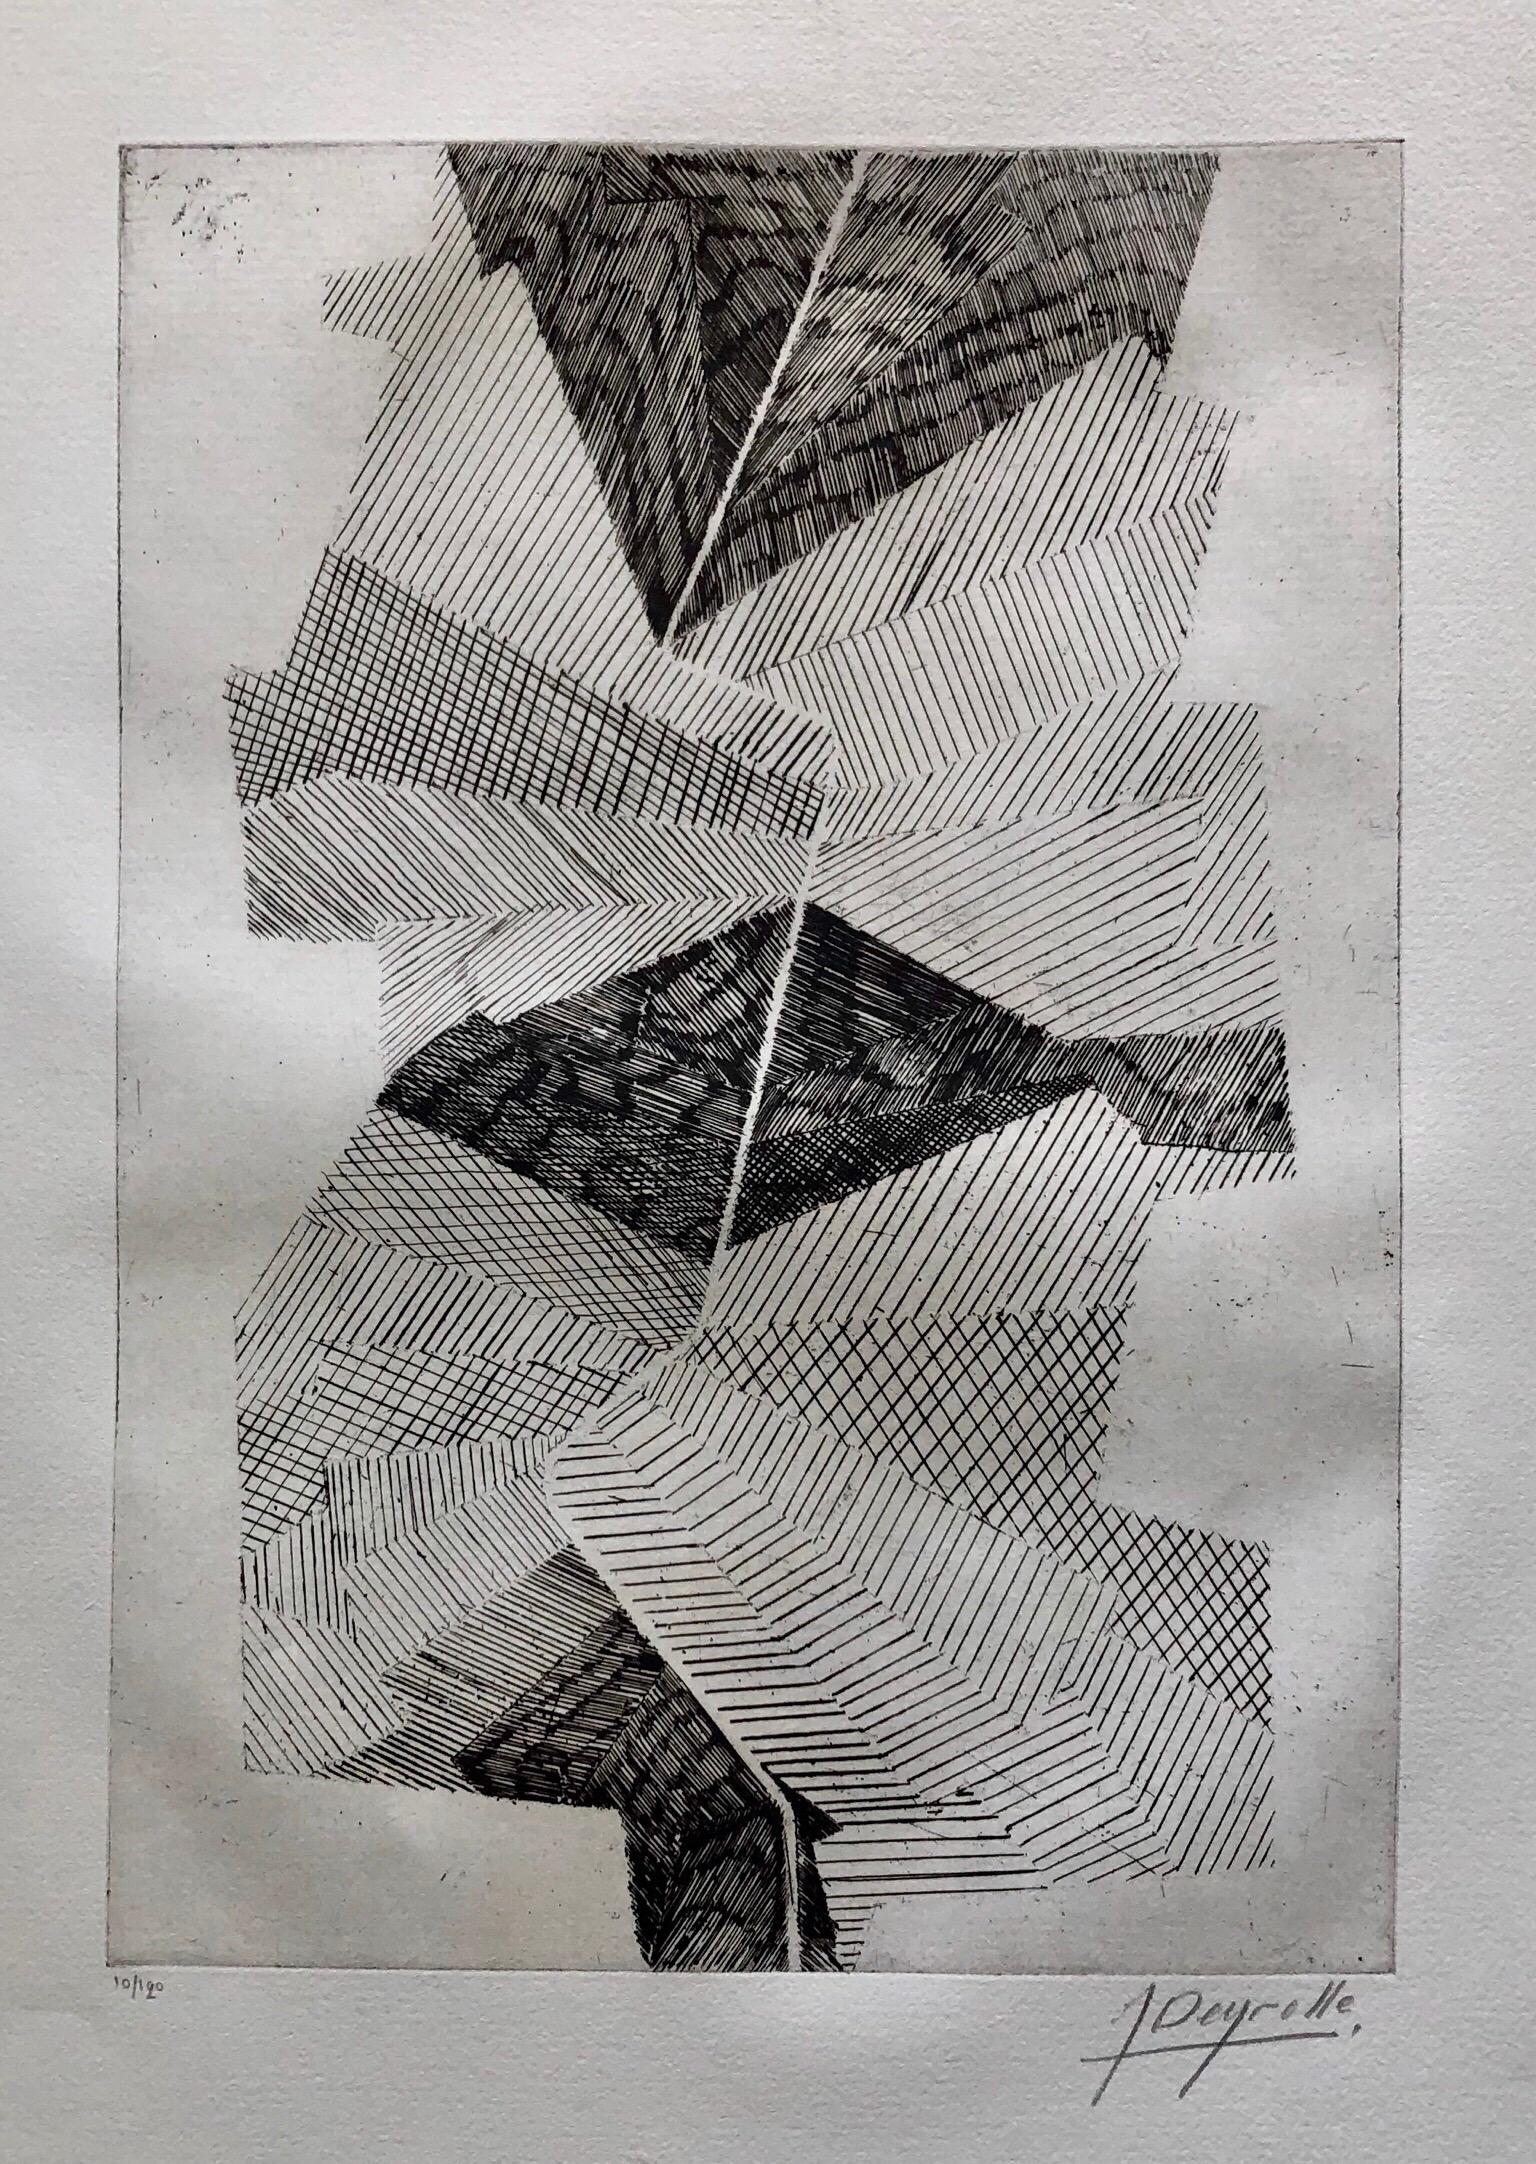 Jean Deyrolle Abstract Print - French Avant Garde Bold Abstract Geometric Aquatint Etching Op Art Kinetic